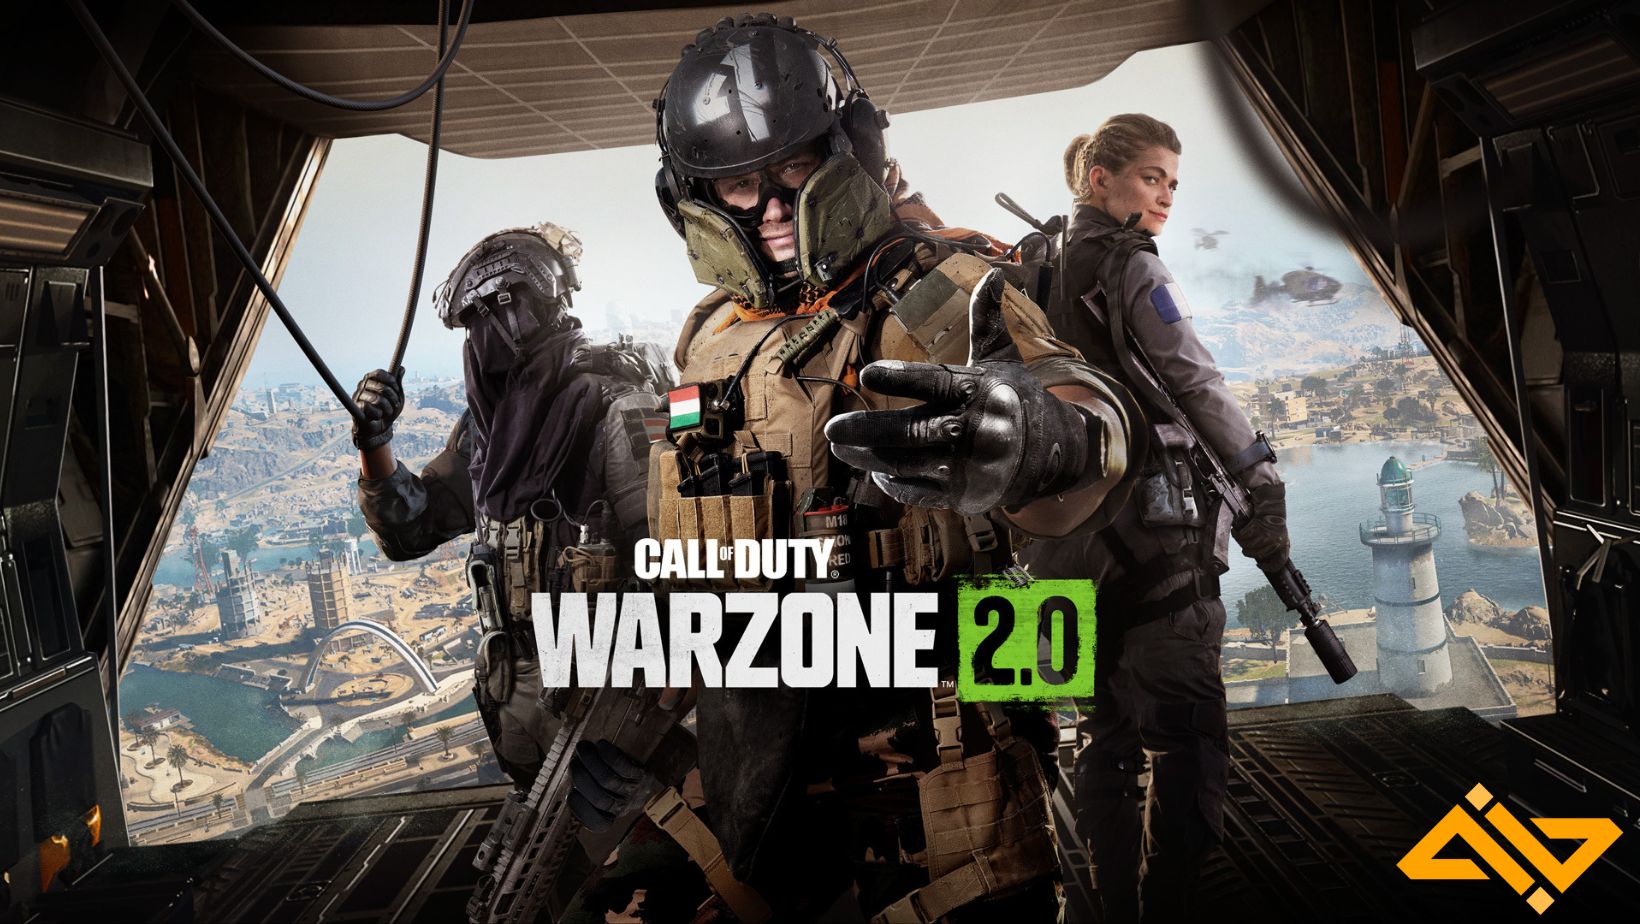 Warzone is absolutely massive in terms of scale as it is a battle royale experience in the CoD universe.